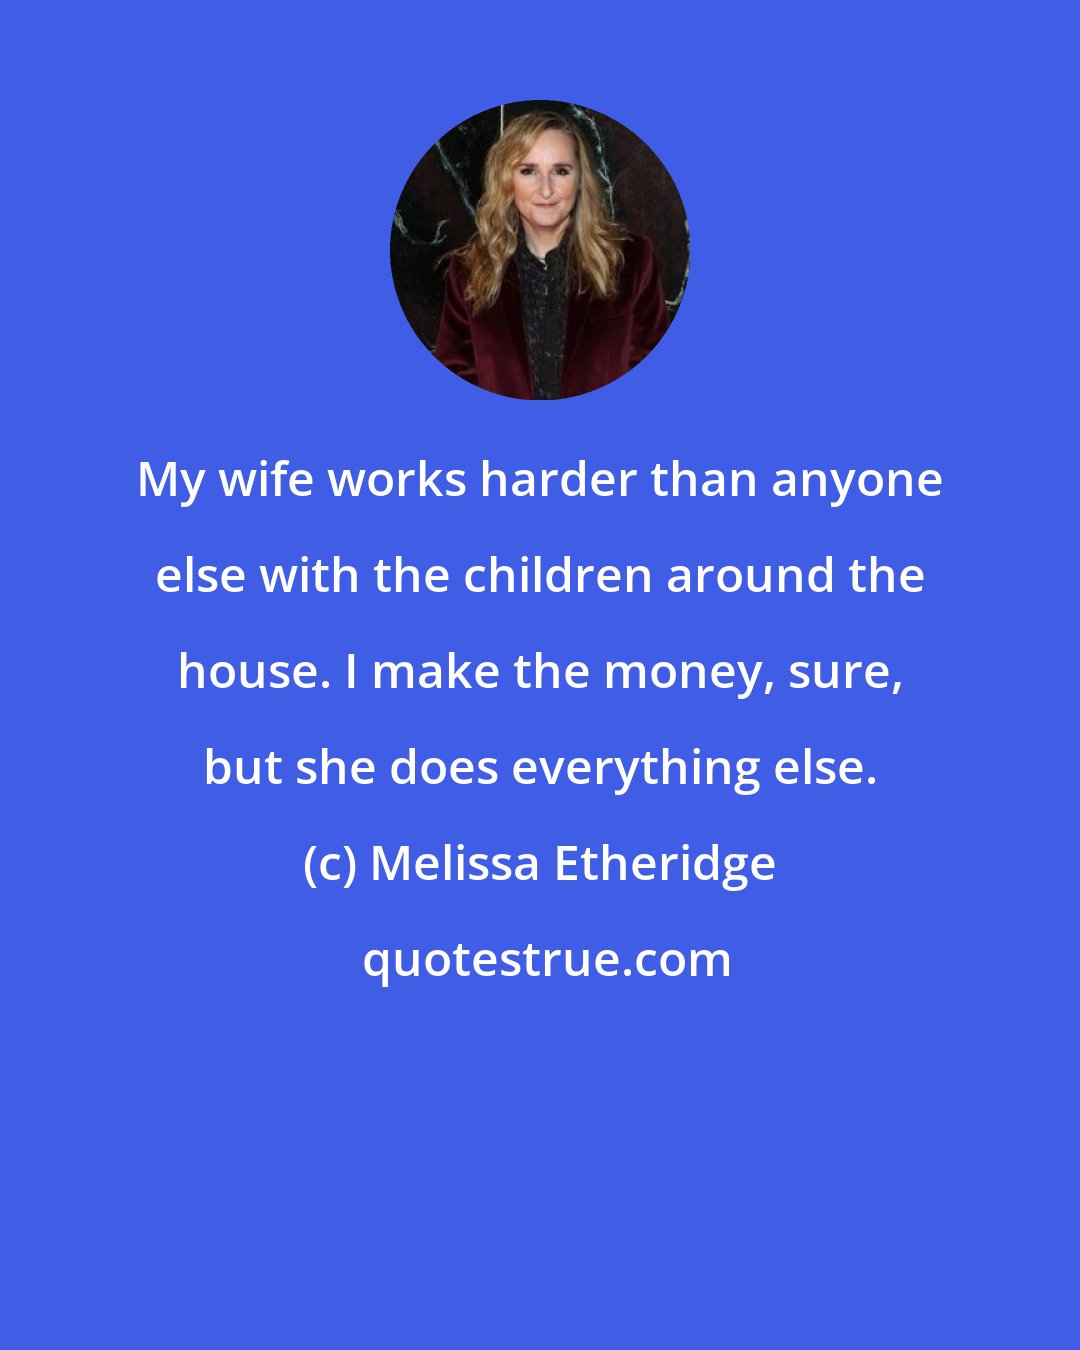 Melissa Etheridge: My wife works harder than anyone else with the children around the house. I make the money, sure, but she does everything else.